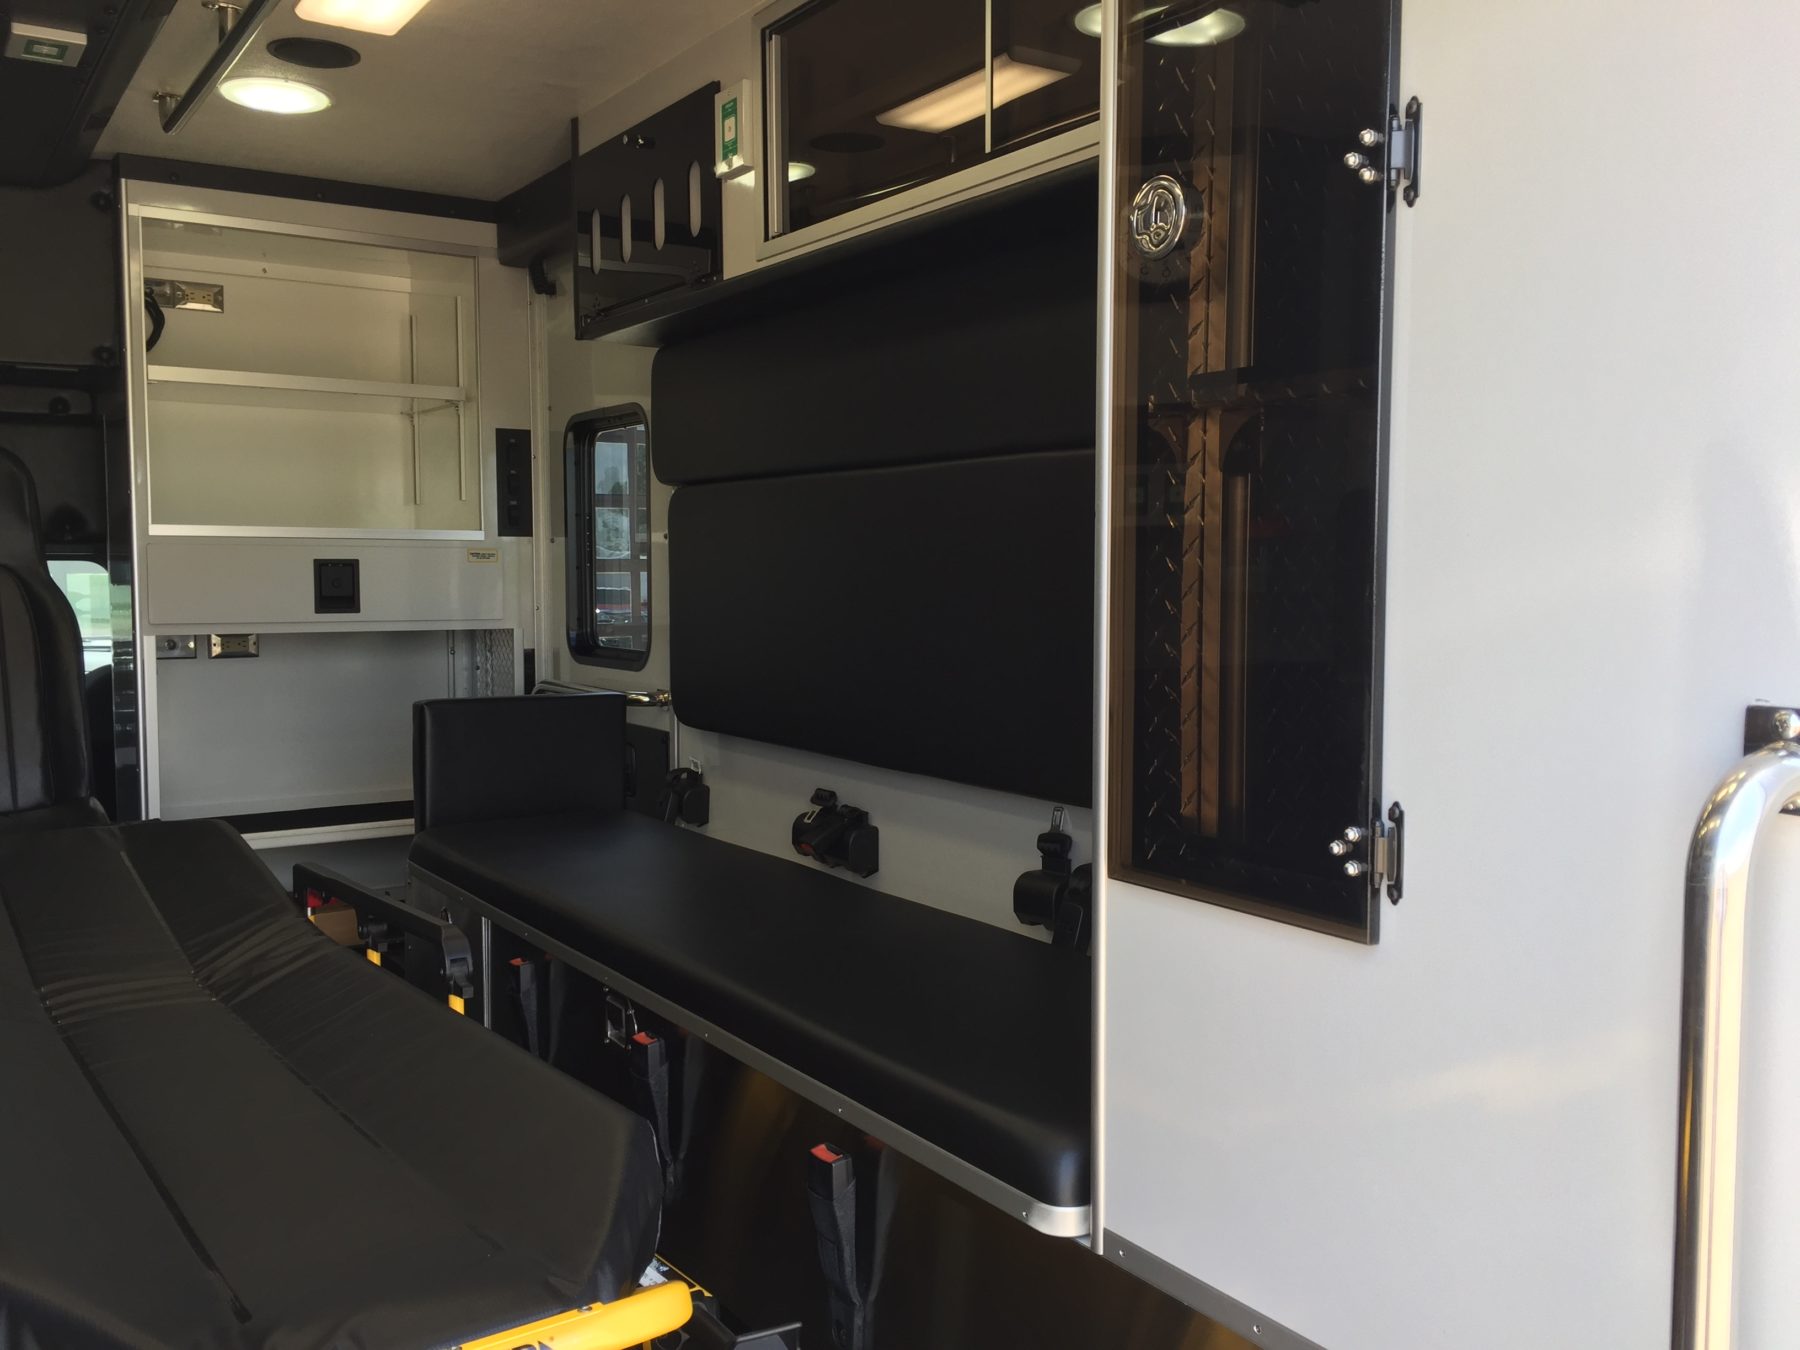 2017 Ram 4500 4x4 Heavy Duty Ambulance For Sale – Picture 11